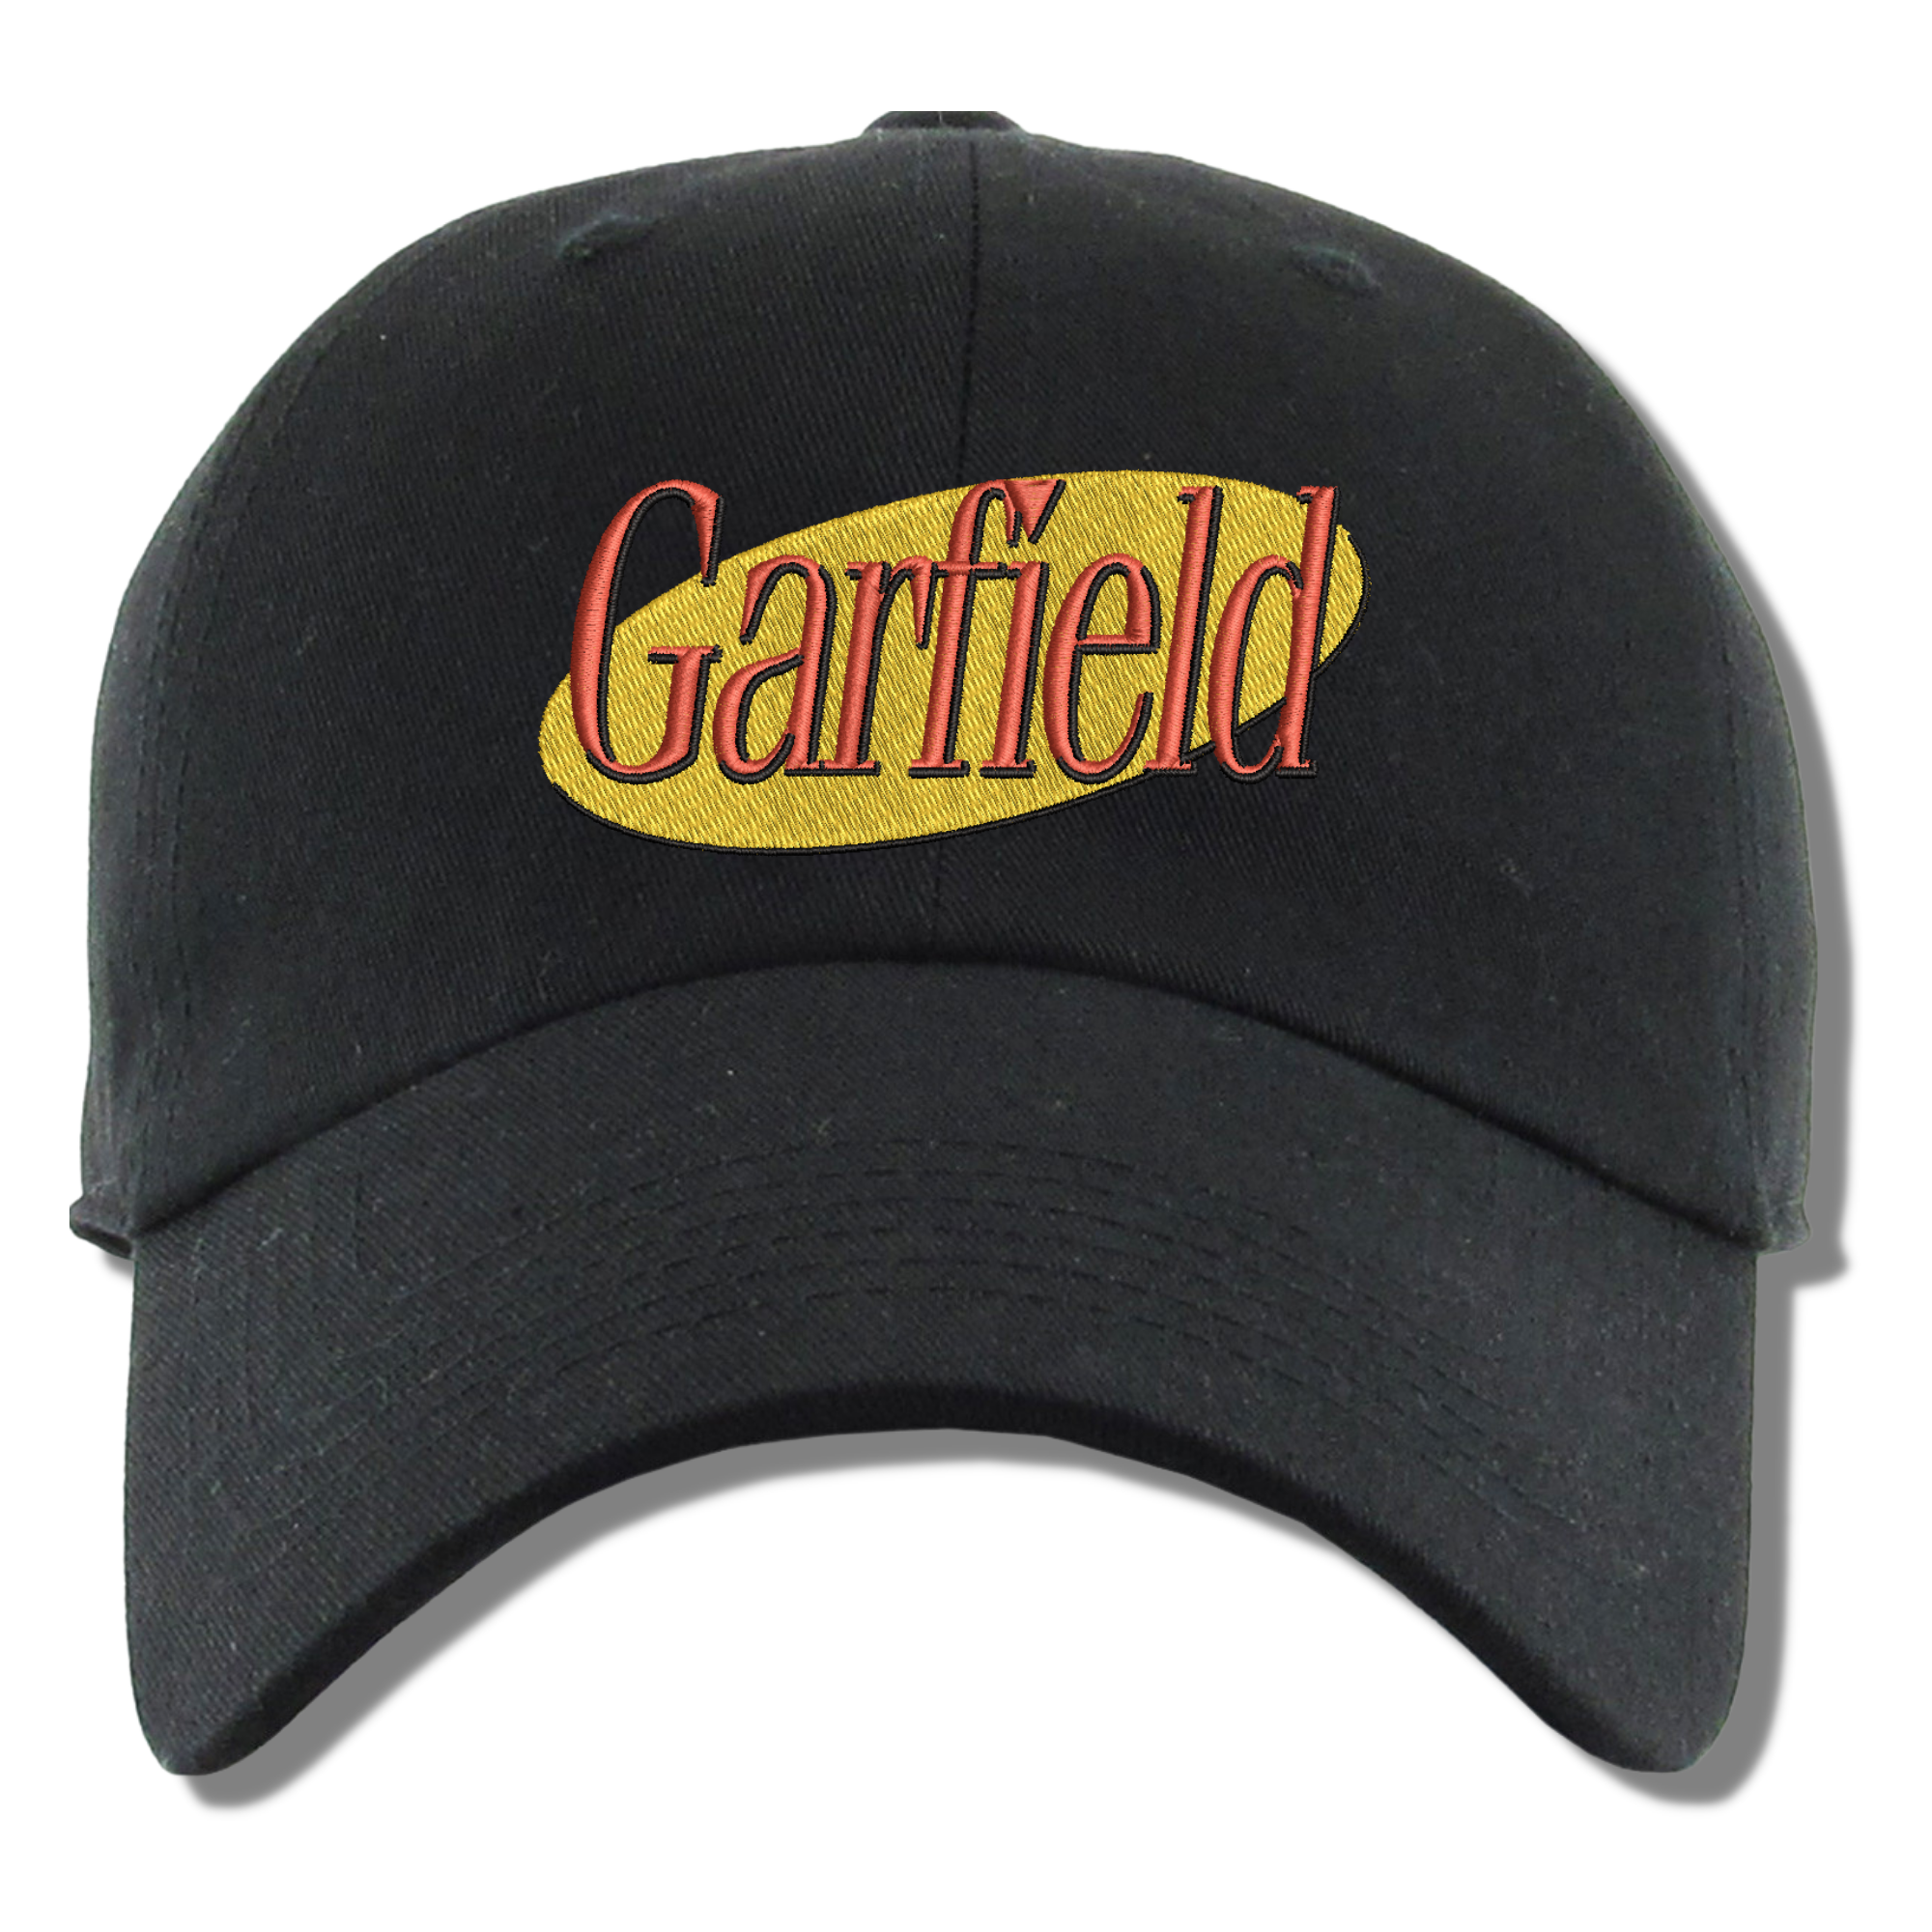 Garfield Seinfeld Crossover Episode Embroidered Black Dad Hat, One Size Fits All